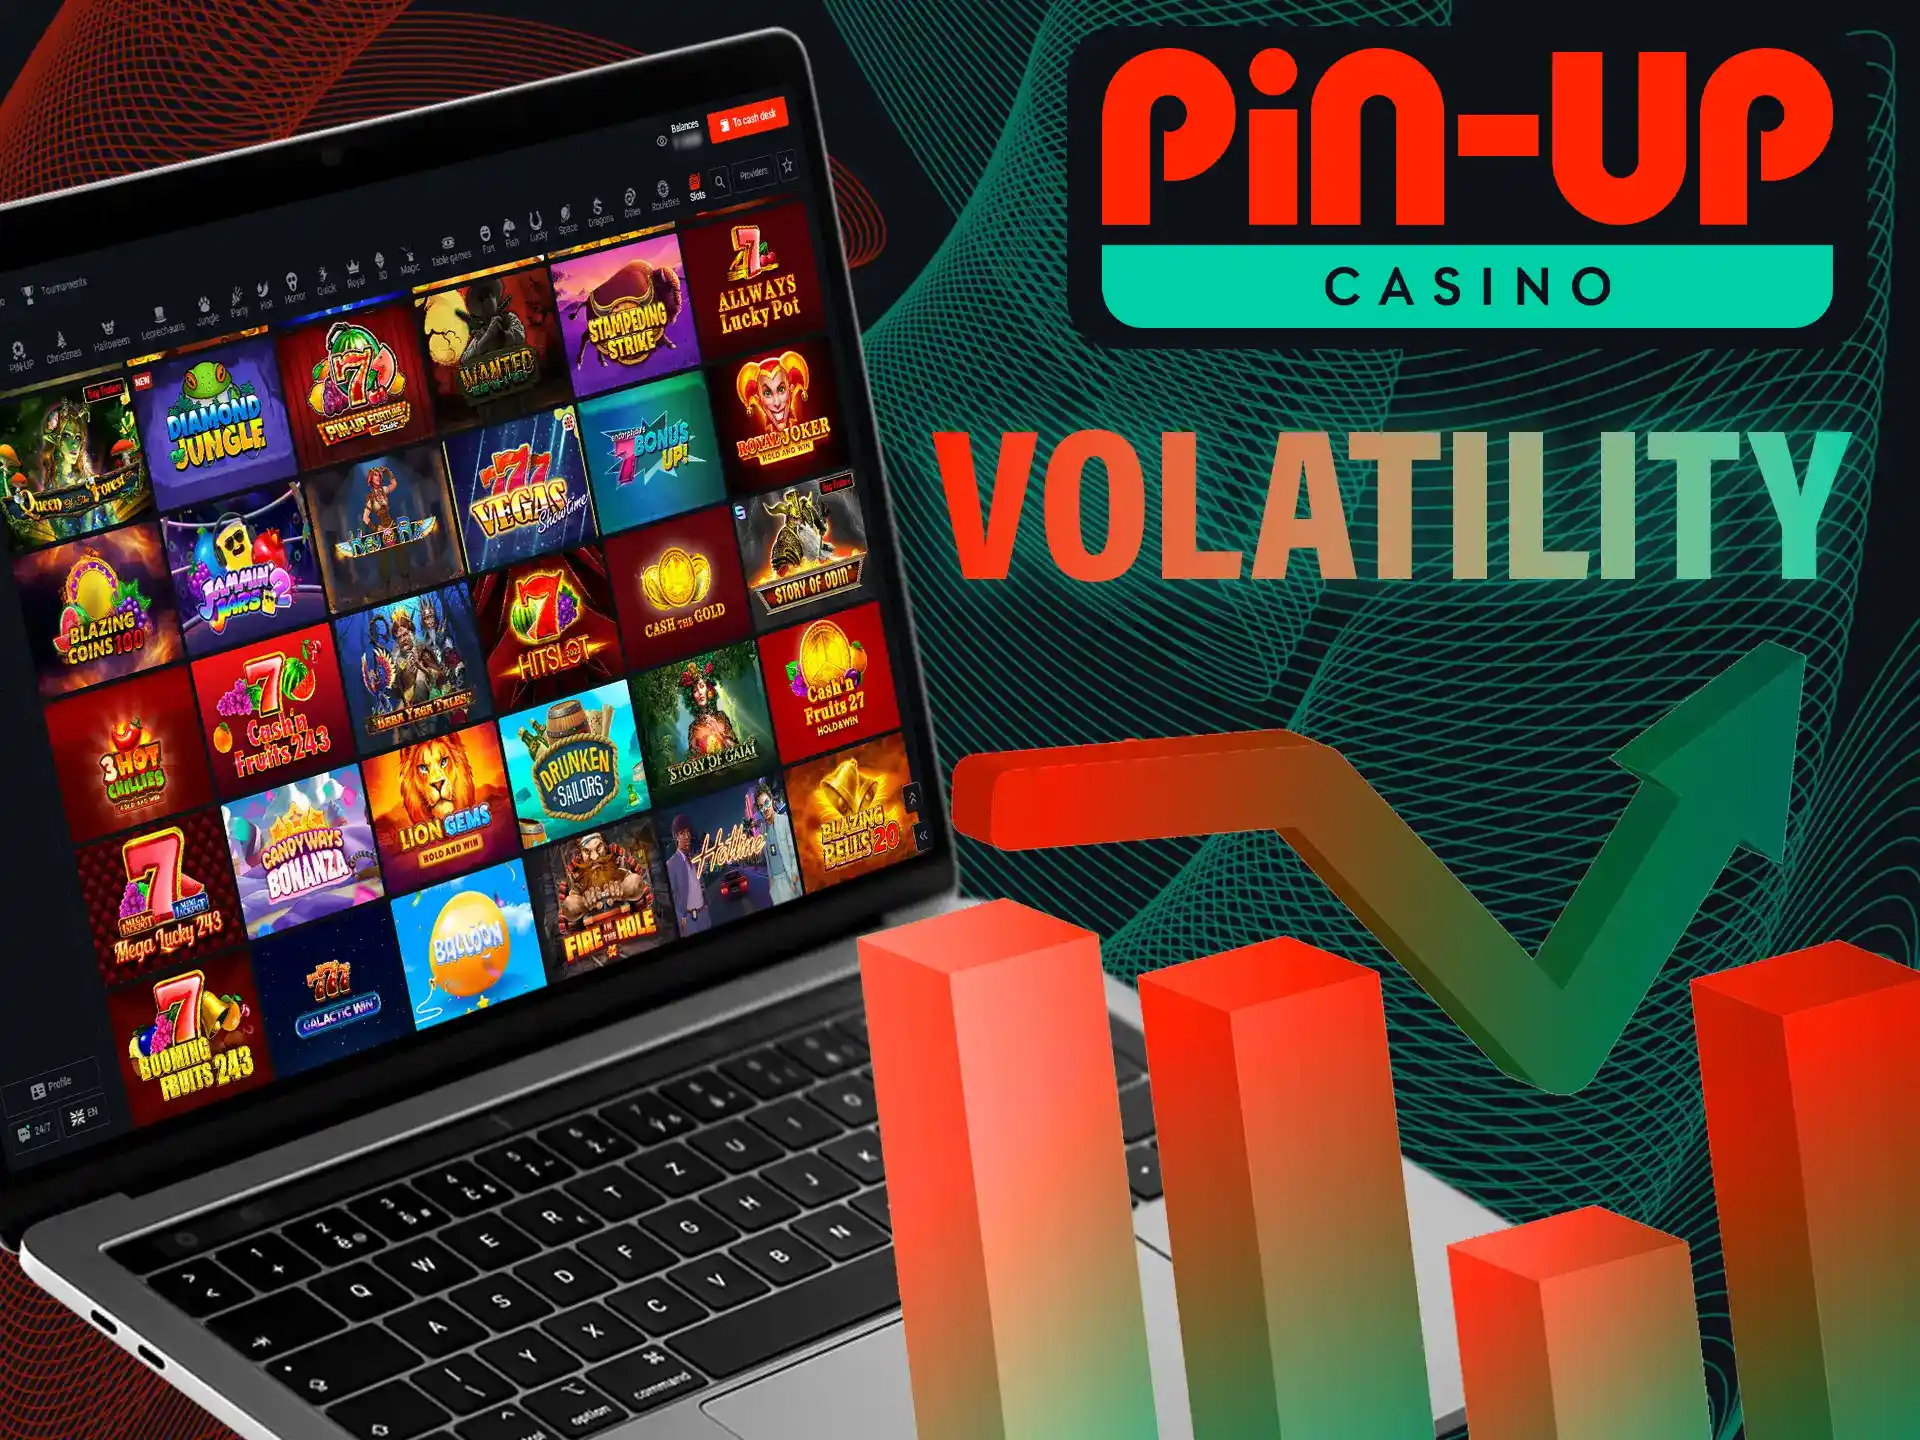 Pin-Up Casino offers a variety of slots with different volatility levels.